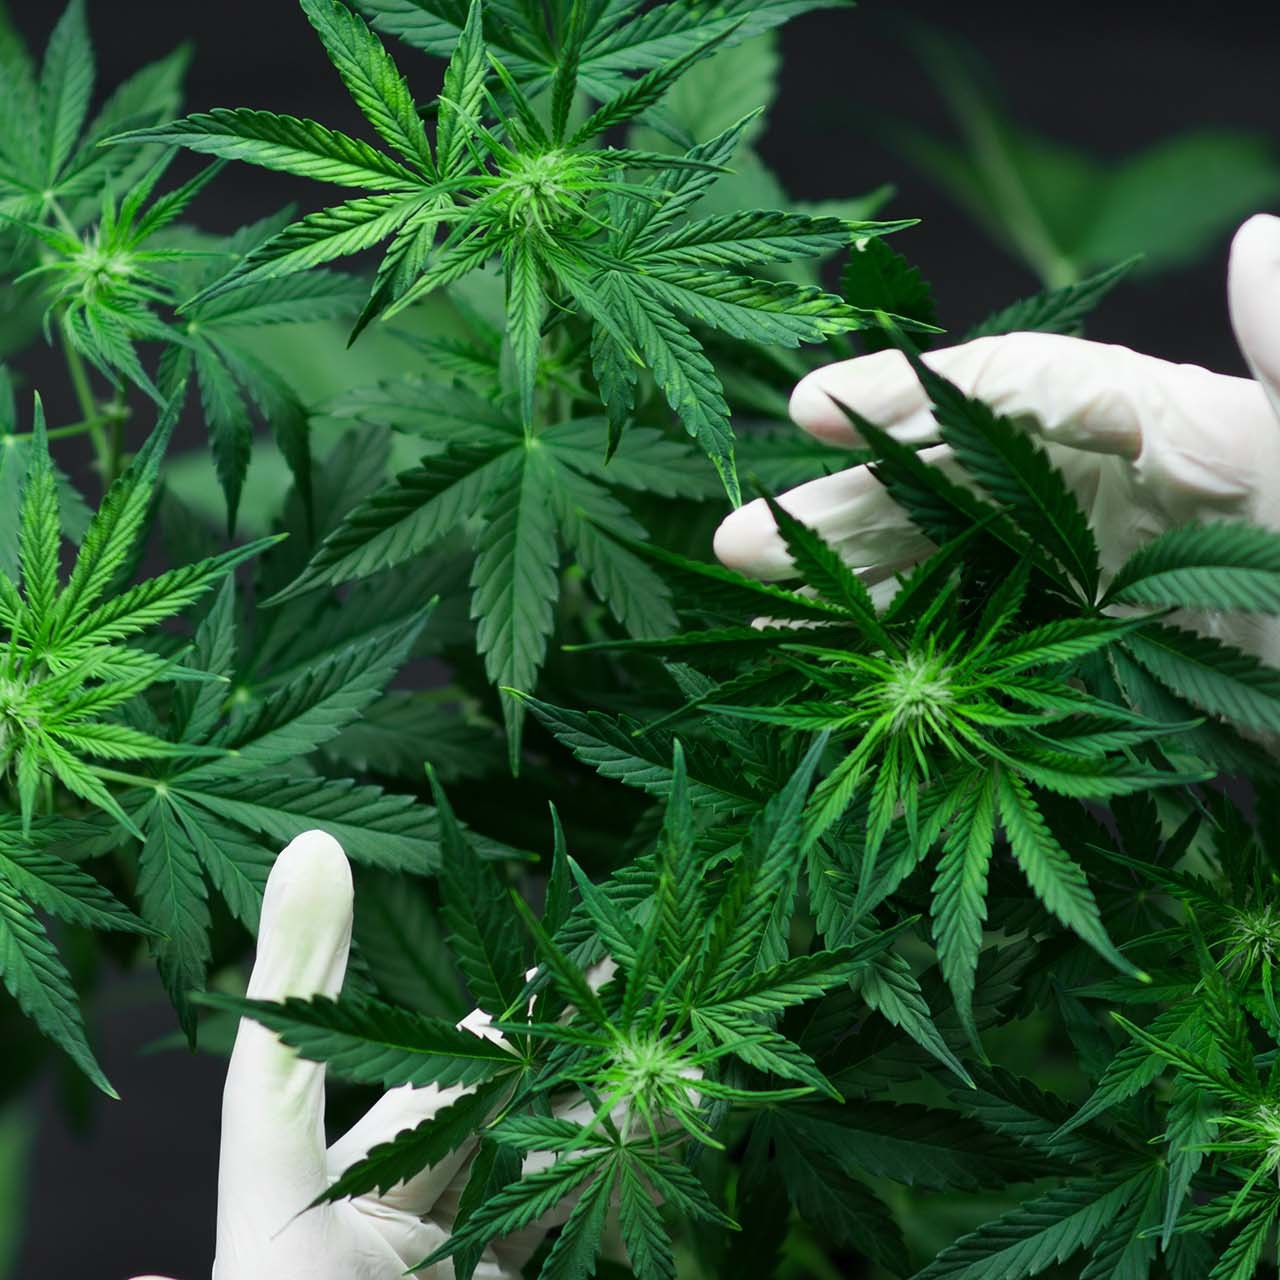 gloved hands hold cannabis plant